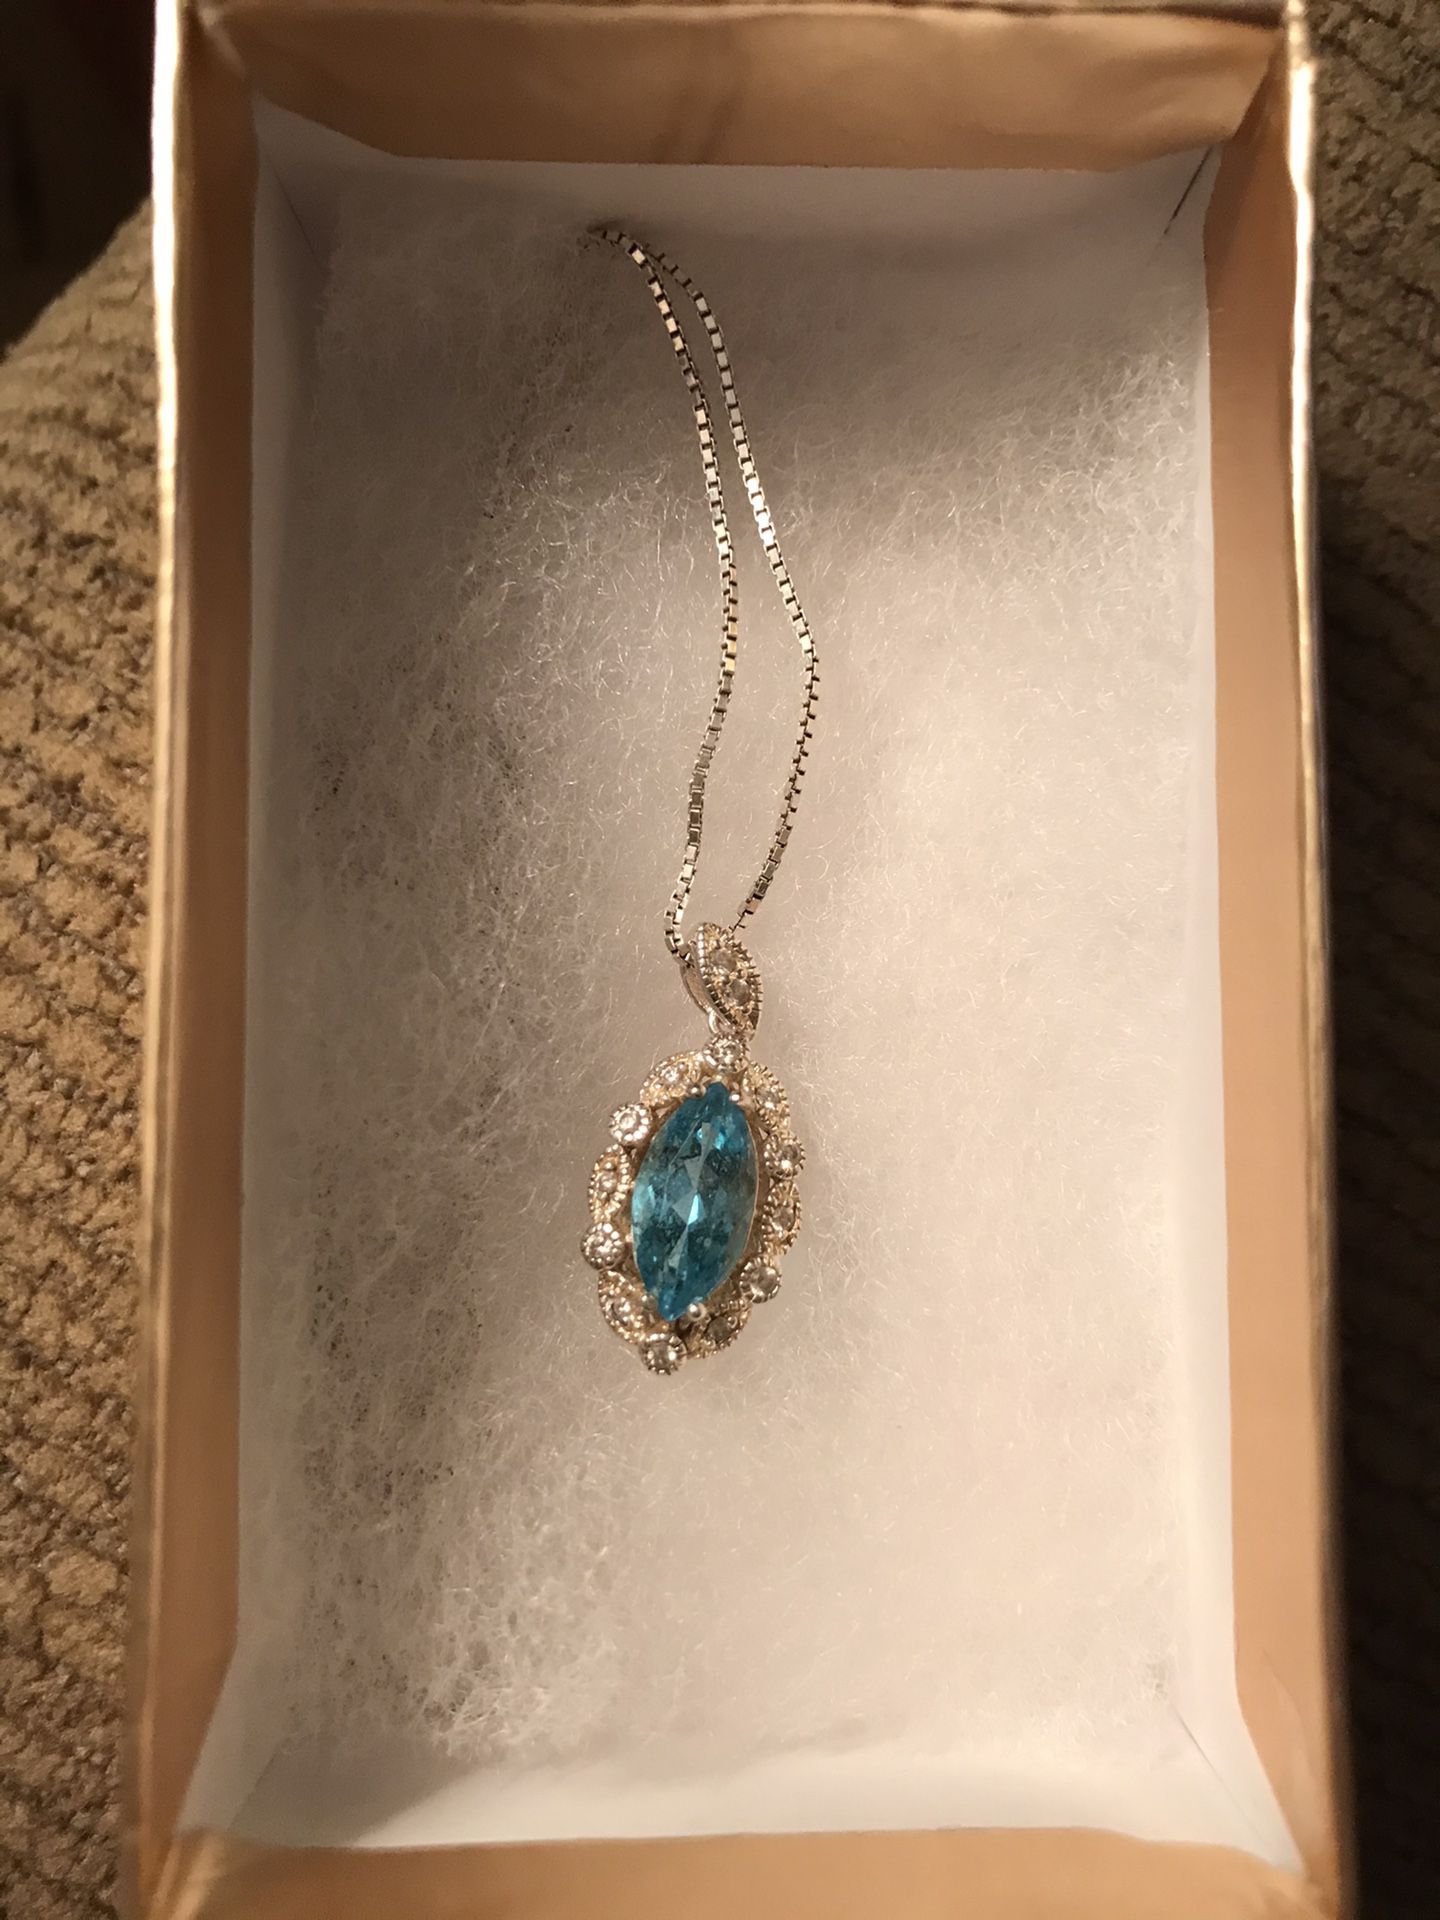 Beautiful Necklace Sterling Silver, Real Diamonds, Blue Topaz.